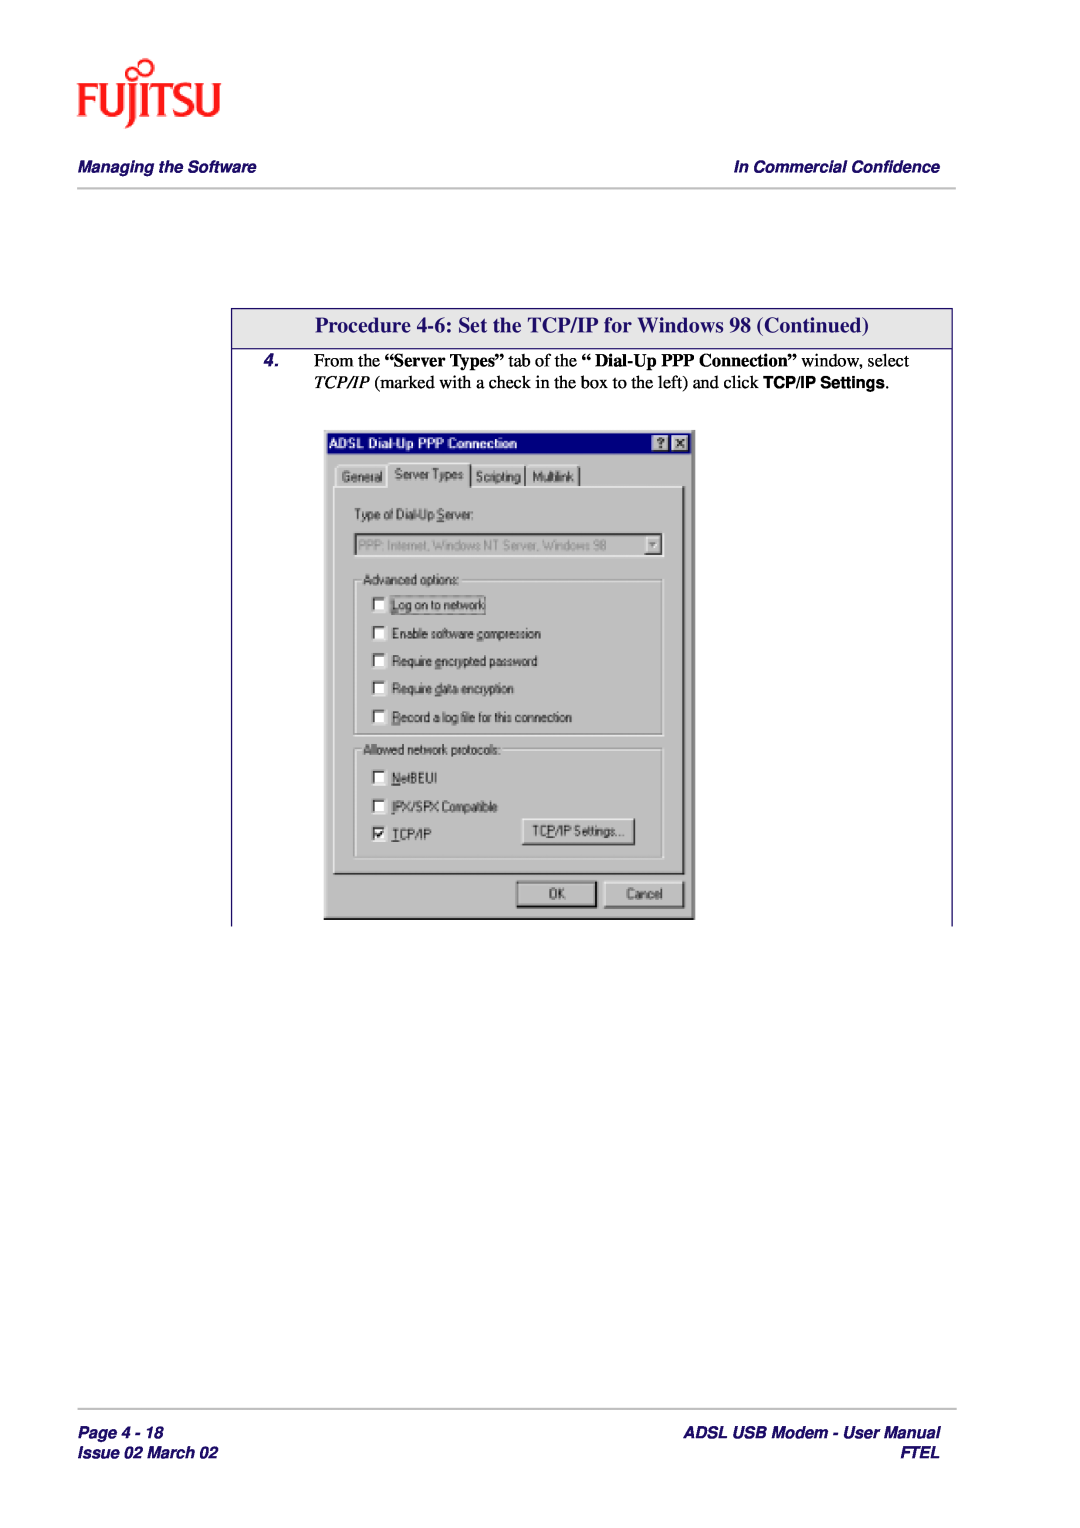 Fujitsu 3XAX-00803AAS Procedure 4-6 Set the TCP/IP for Windows 98 Continued, Managing the Software, Page 4, Issue 02 March 